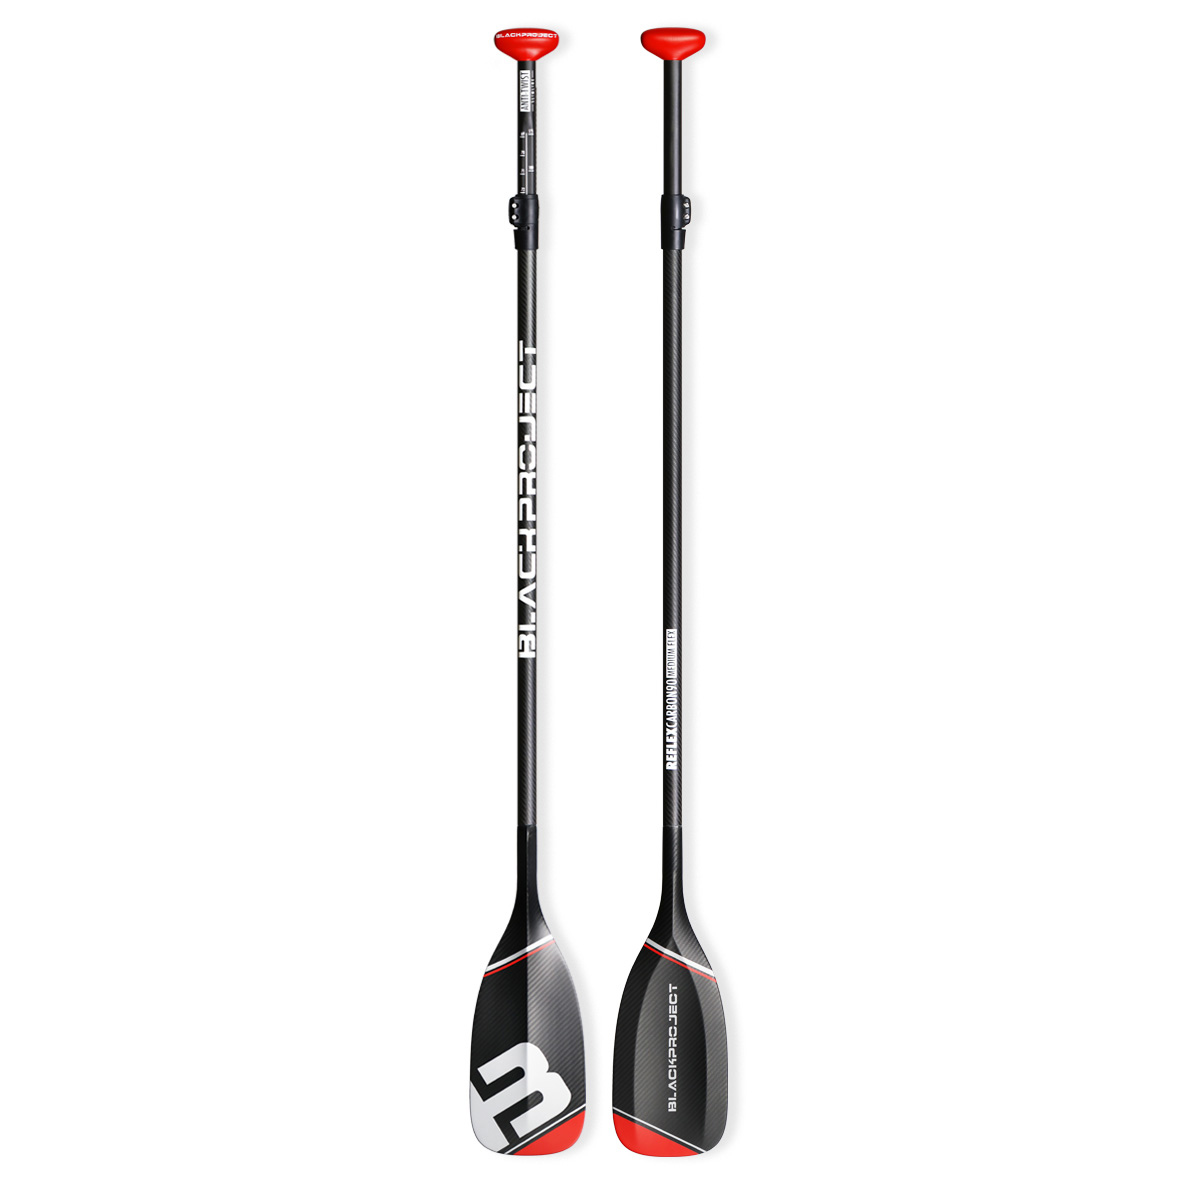 Hydro TempoX Adjustable SUP Paddle | BLACK PROJECT SUP